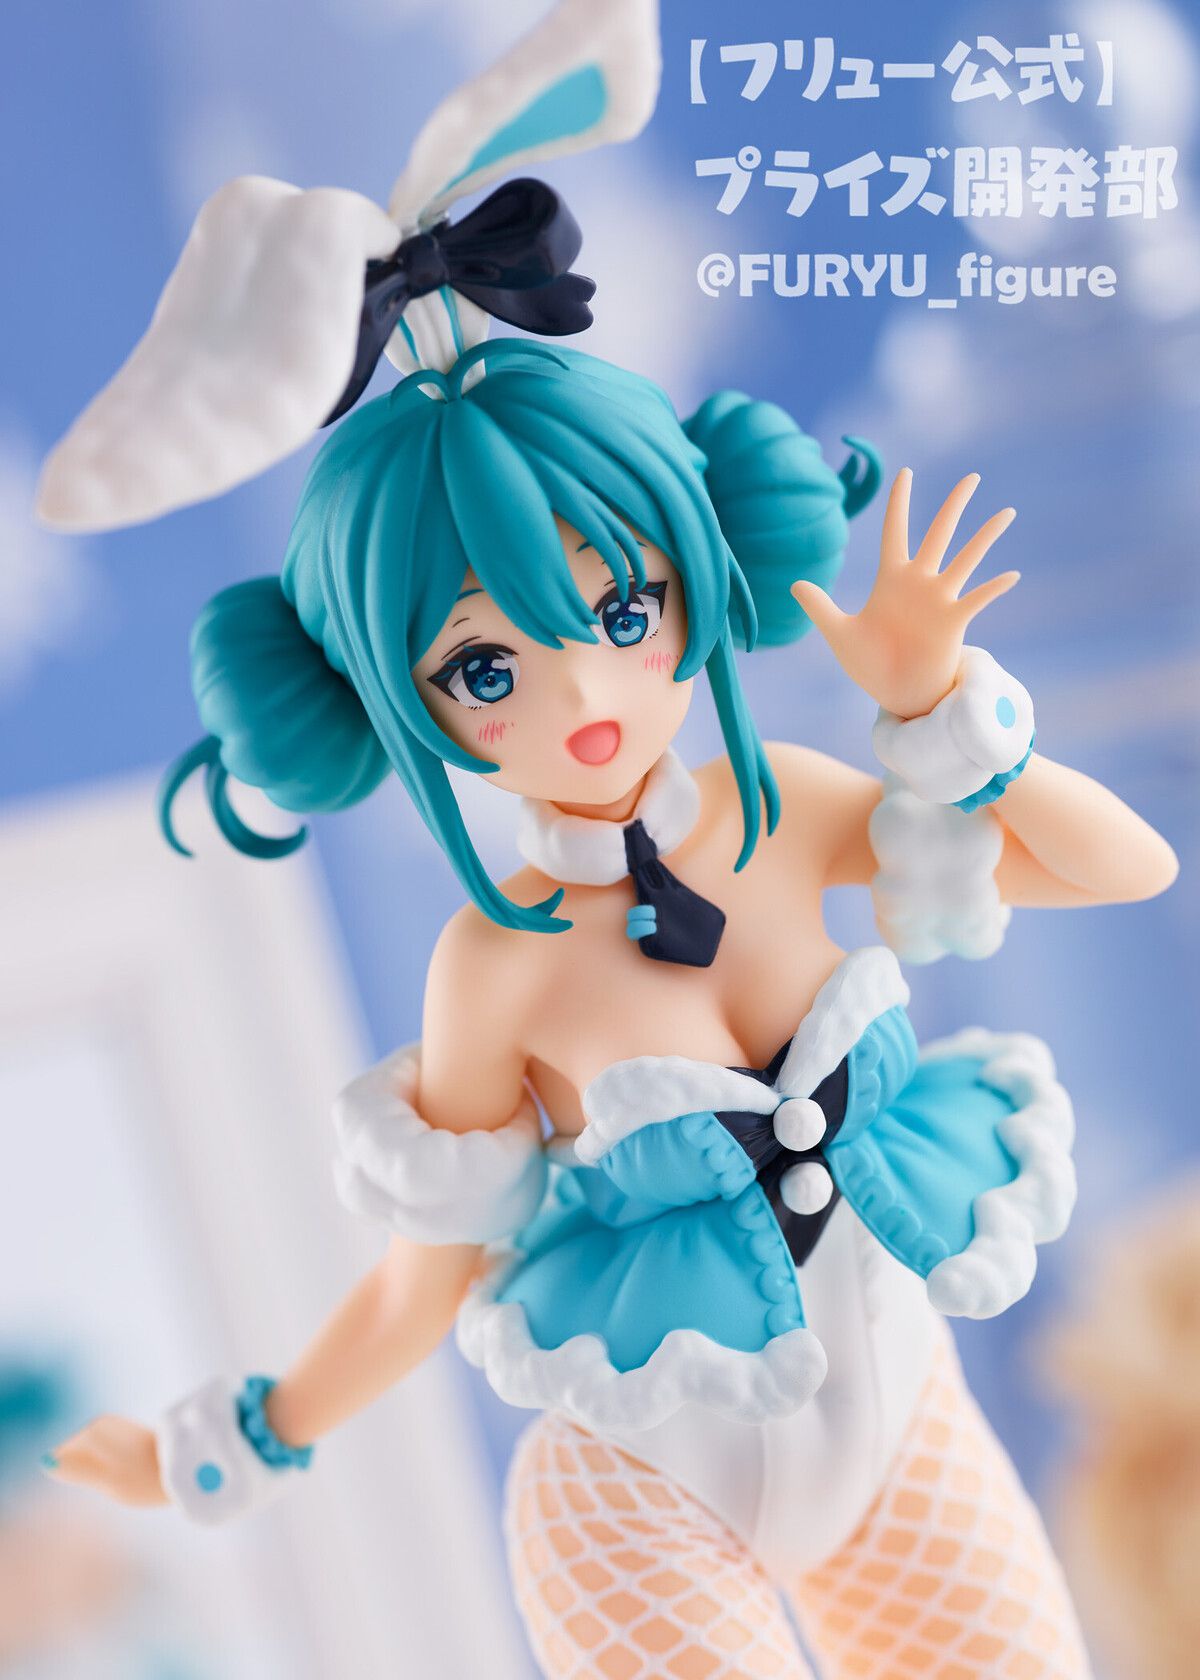 [Hatsune Miku] Erotic figure of the bunny figure of the and thighs of the muchimuchi drawn by Anmi teacher! 4